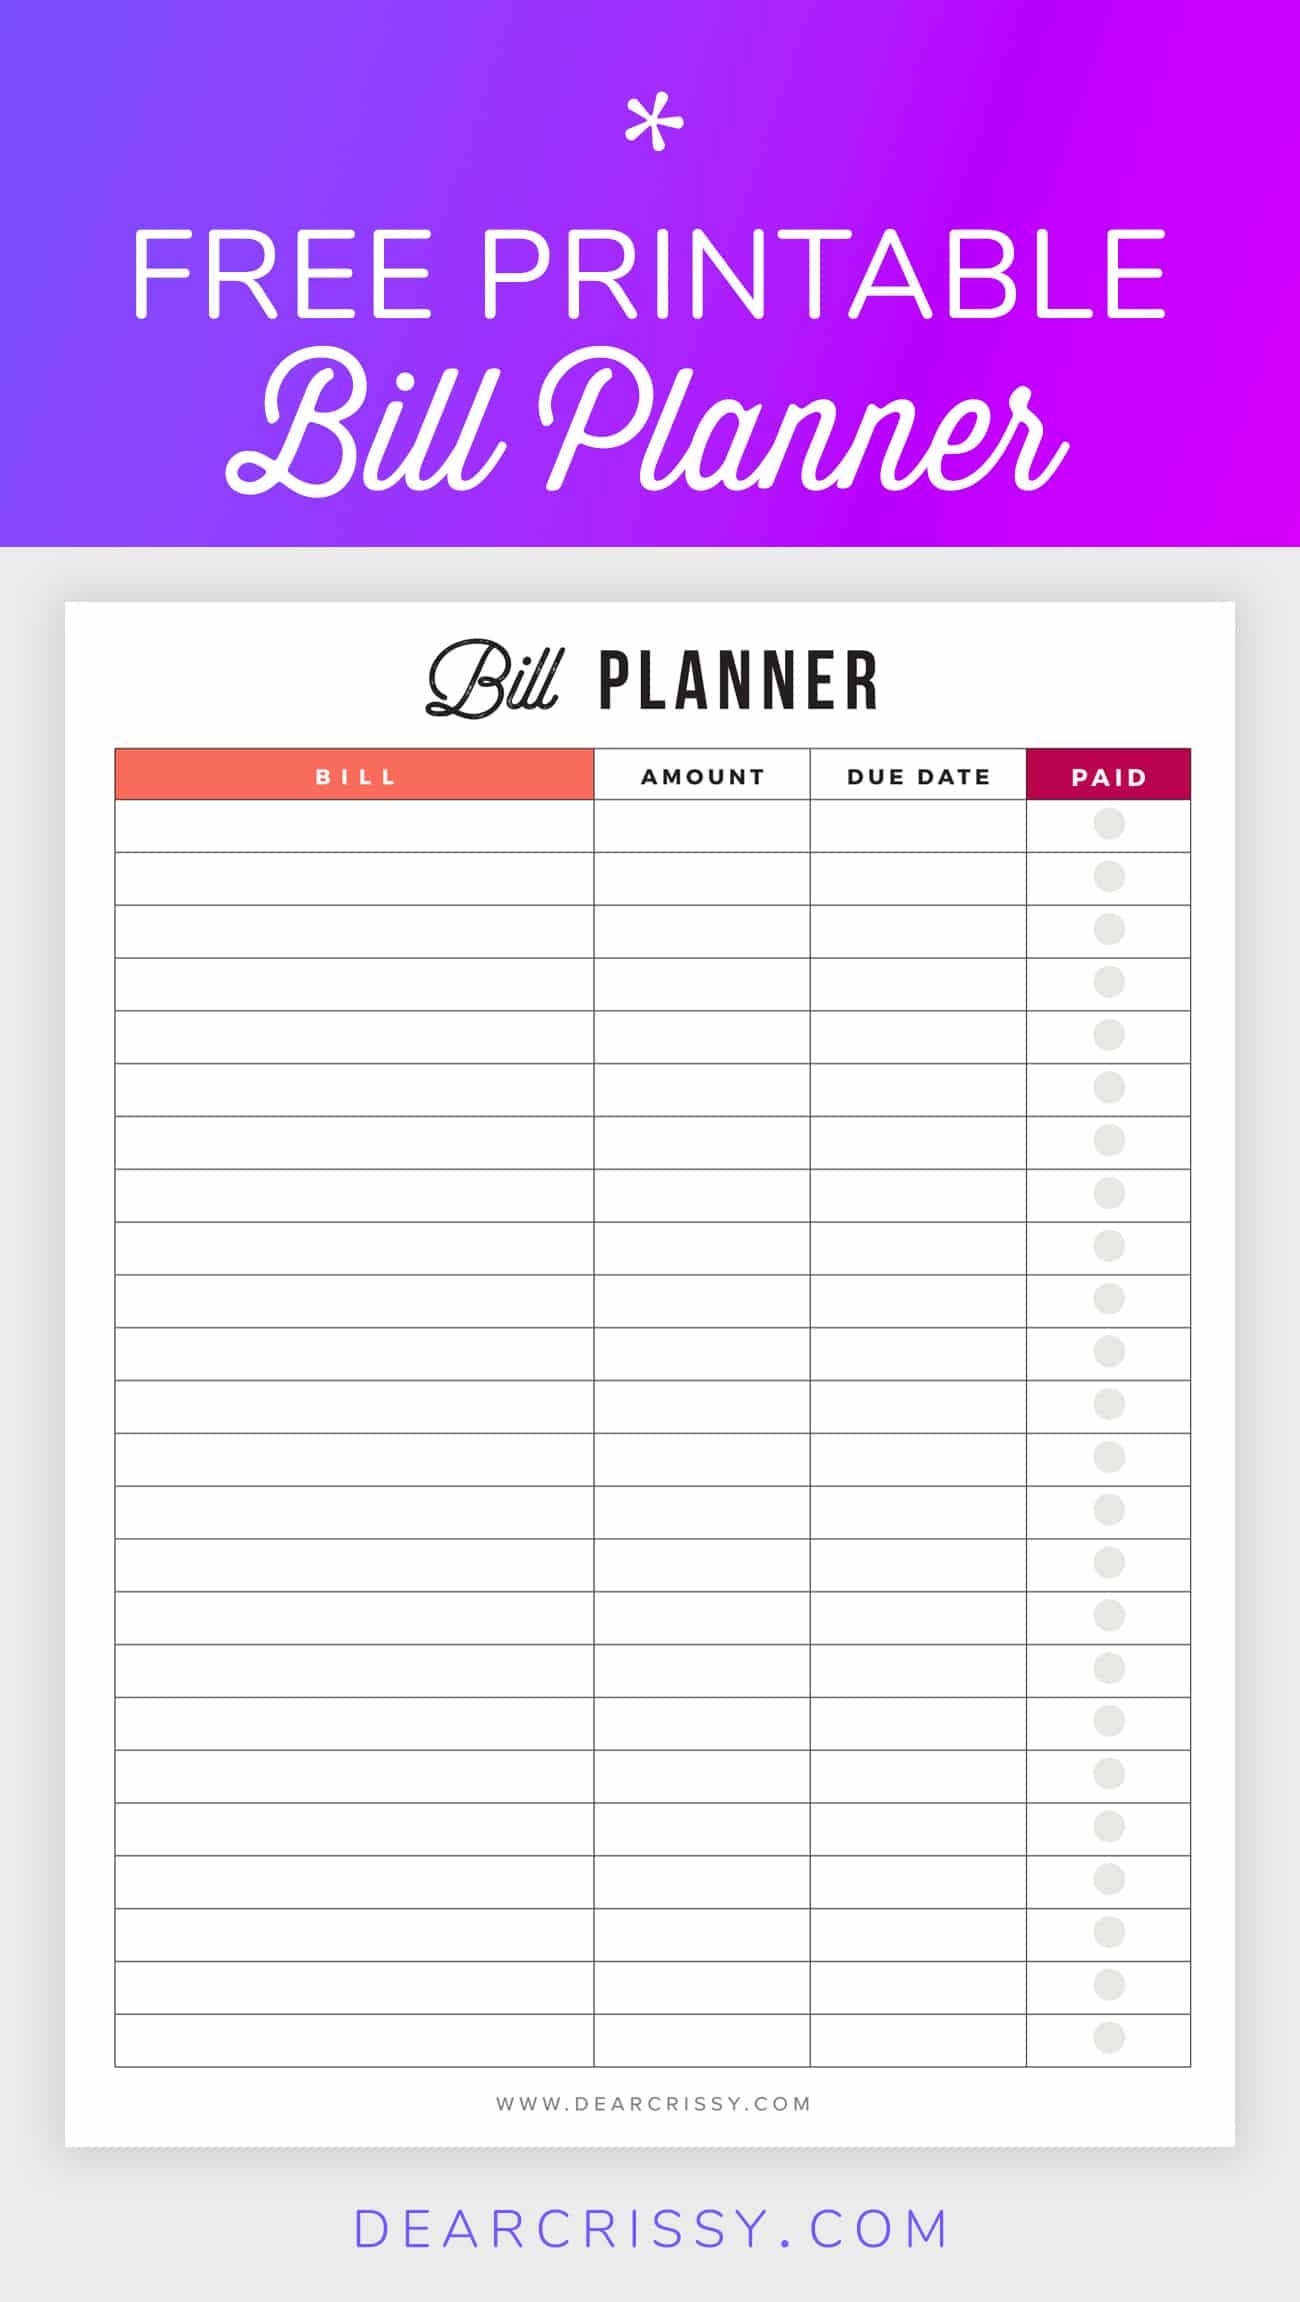 Bill Planner Printable - Pay Down Your Bills This Year!-2020 Monthly Bill Planner Printable